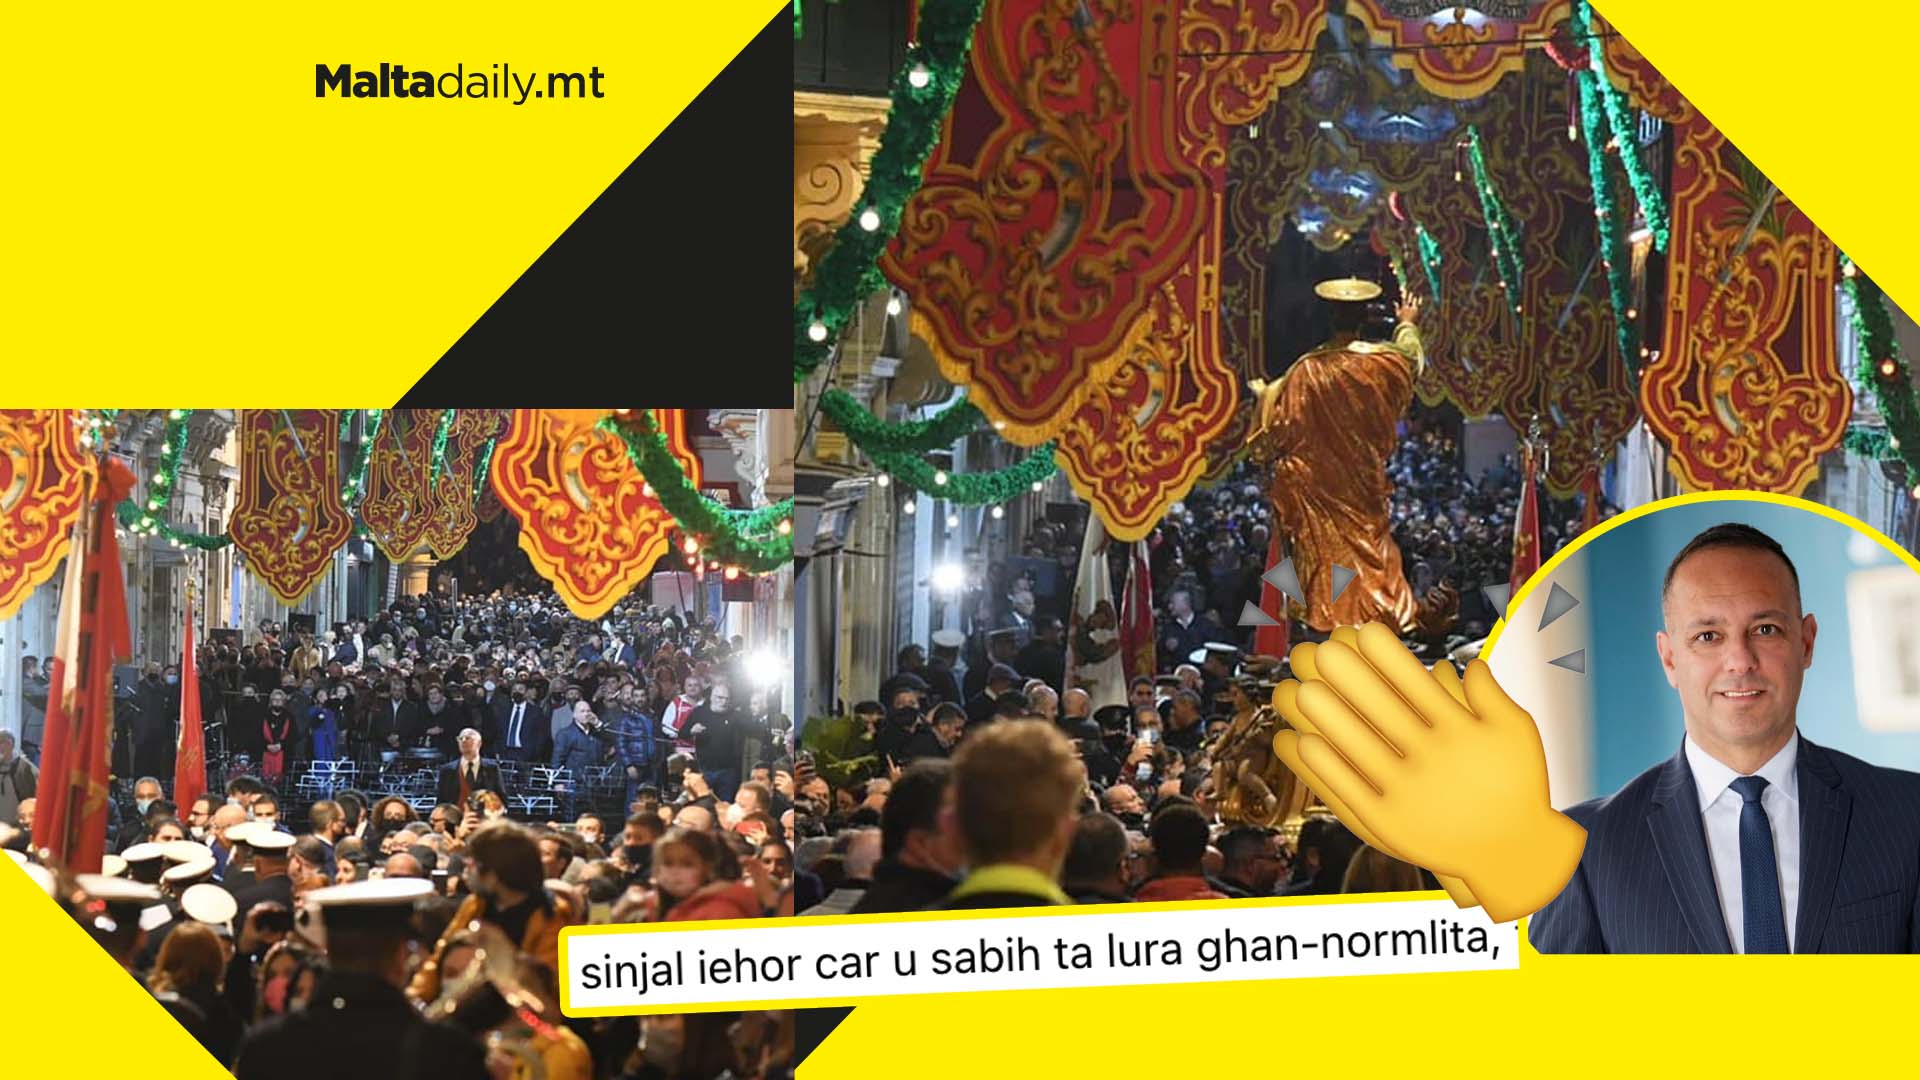 WATCH: Locals celebrate St. Paul's feast in Valletta after health authorities give green light